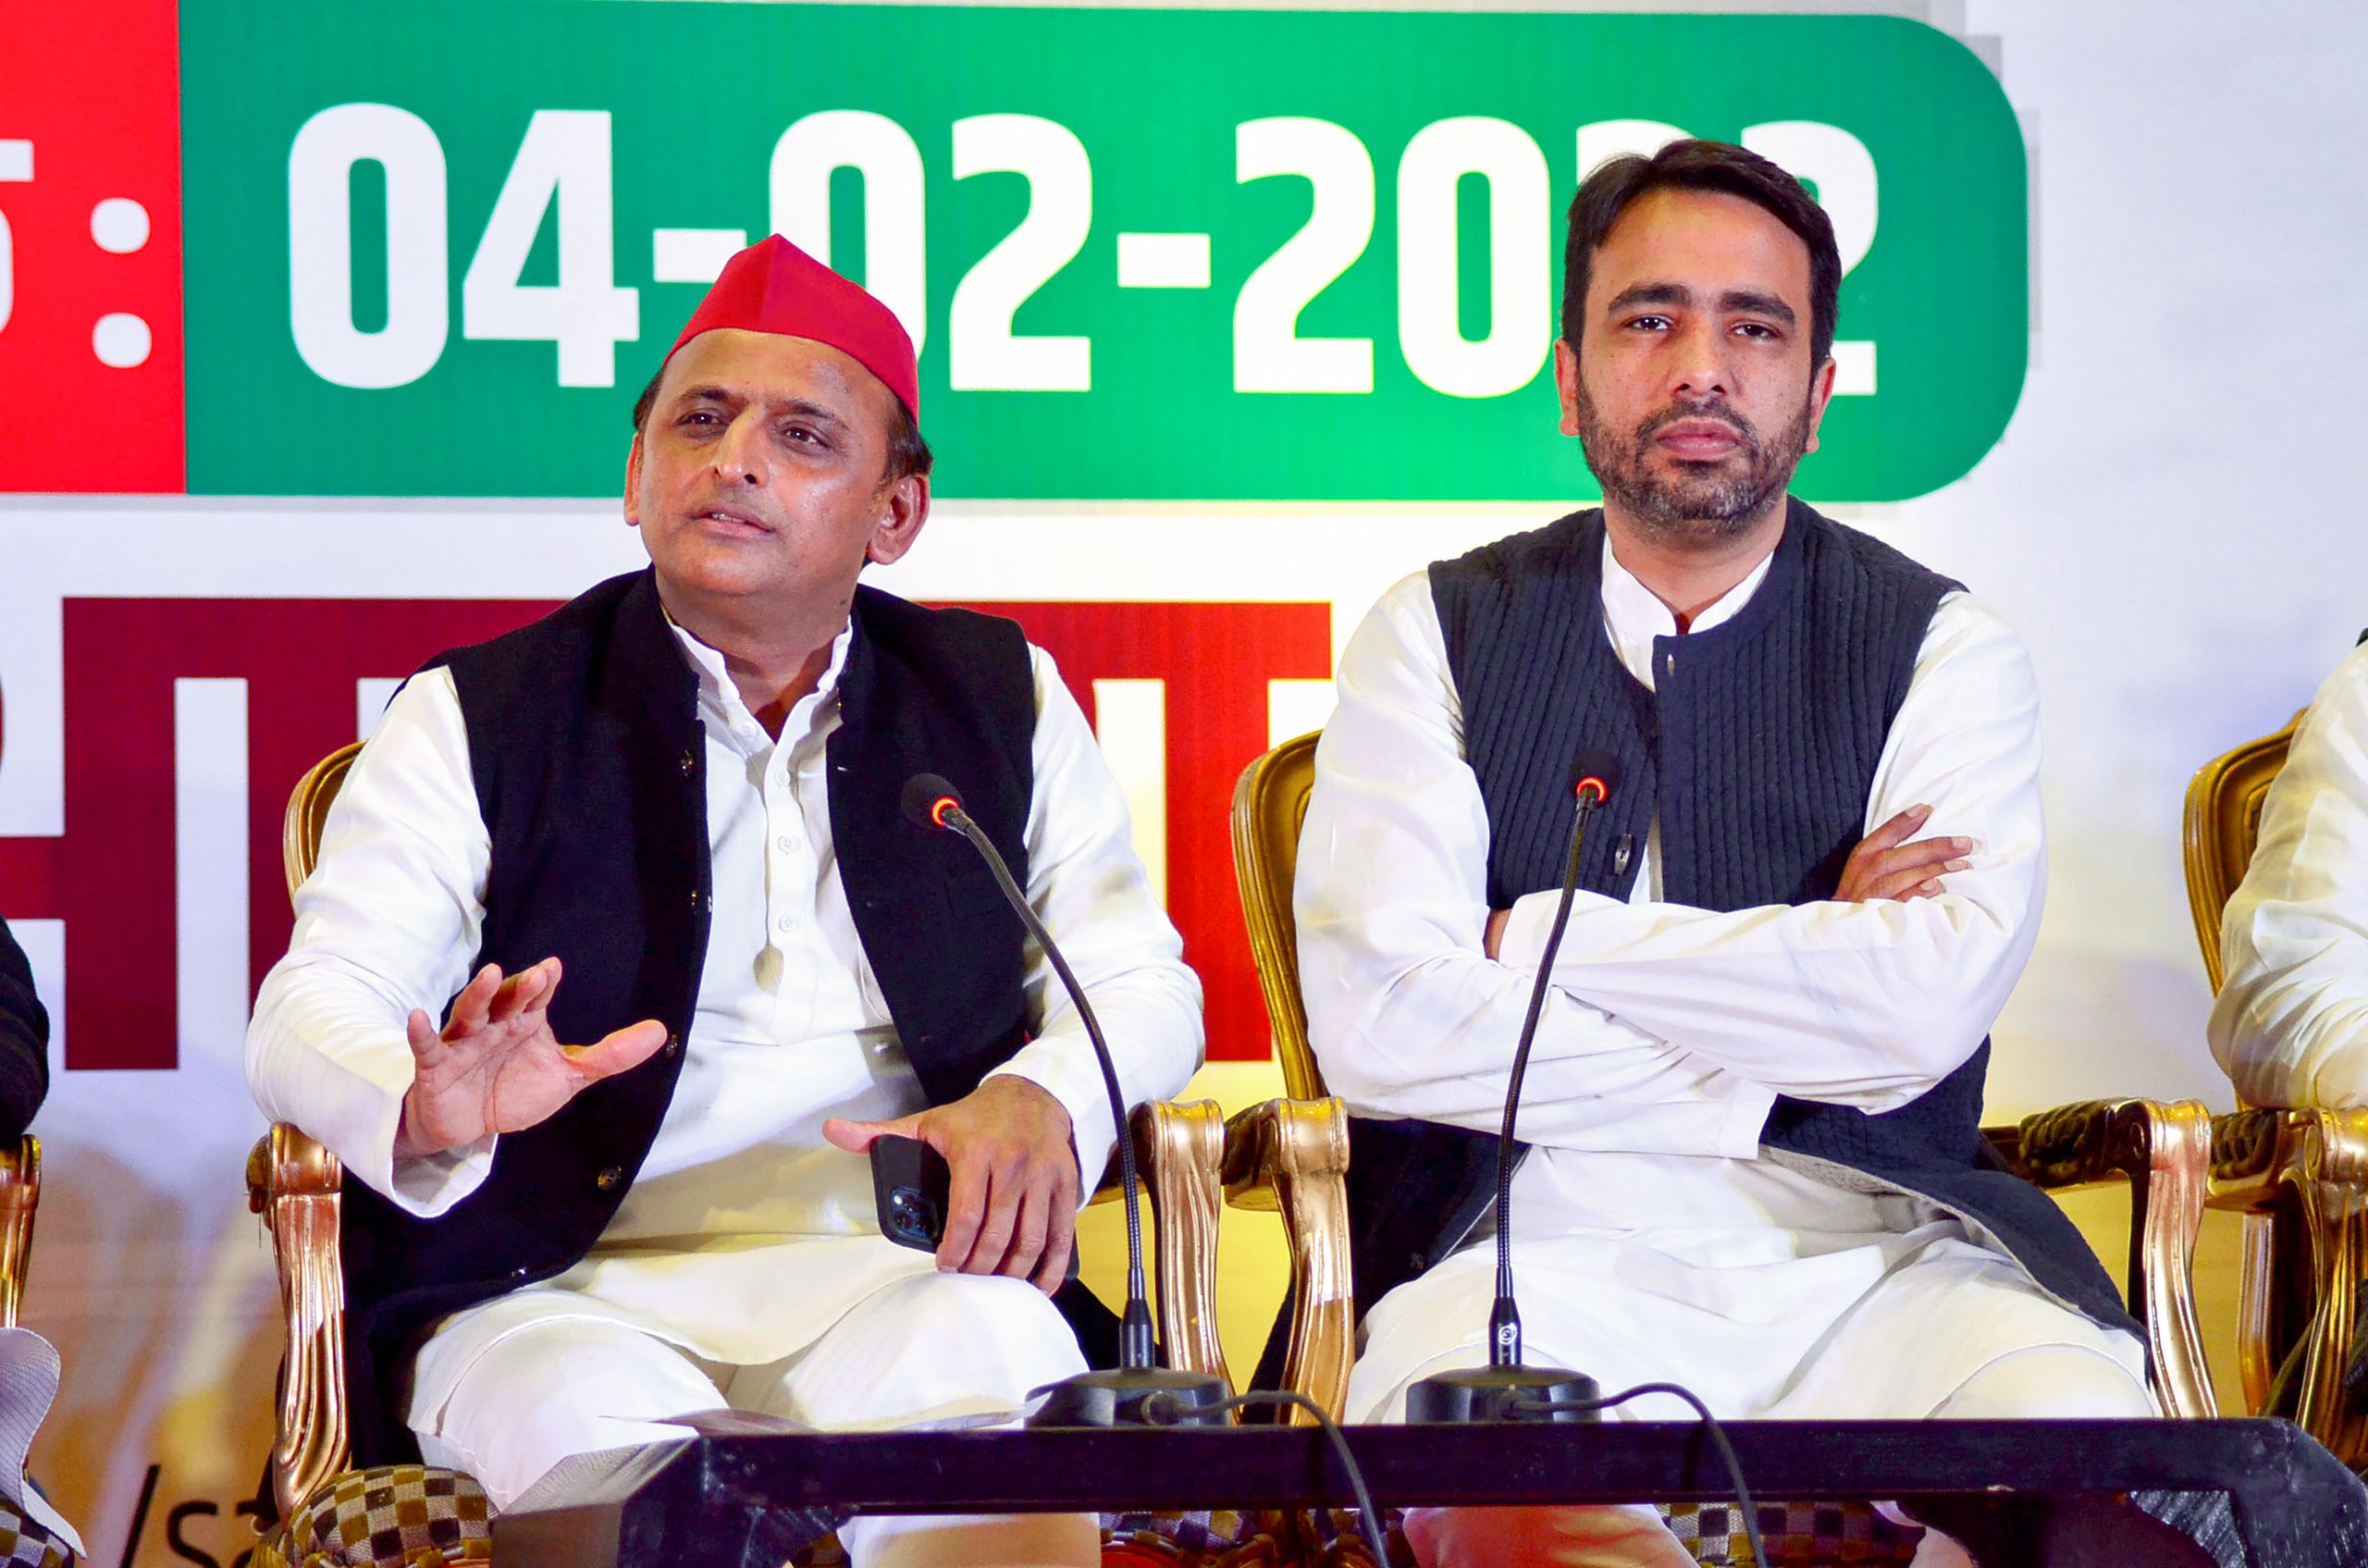 UP Elections 2022: Akhilesh Yadav-ally Jayant Chaudhary wants people to elect a government that cares